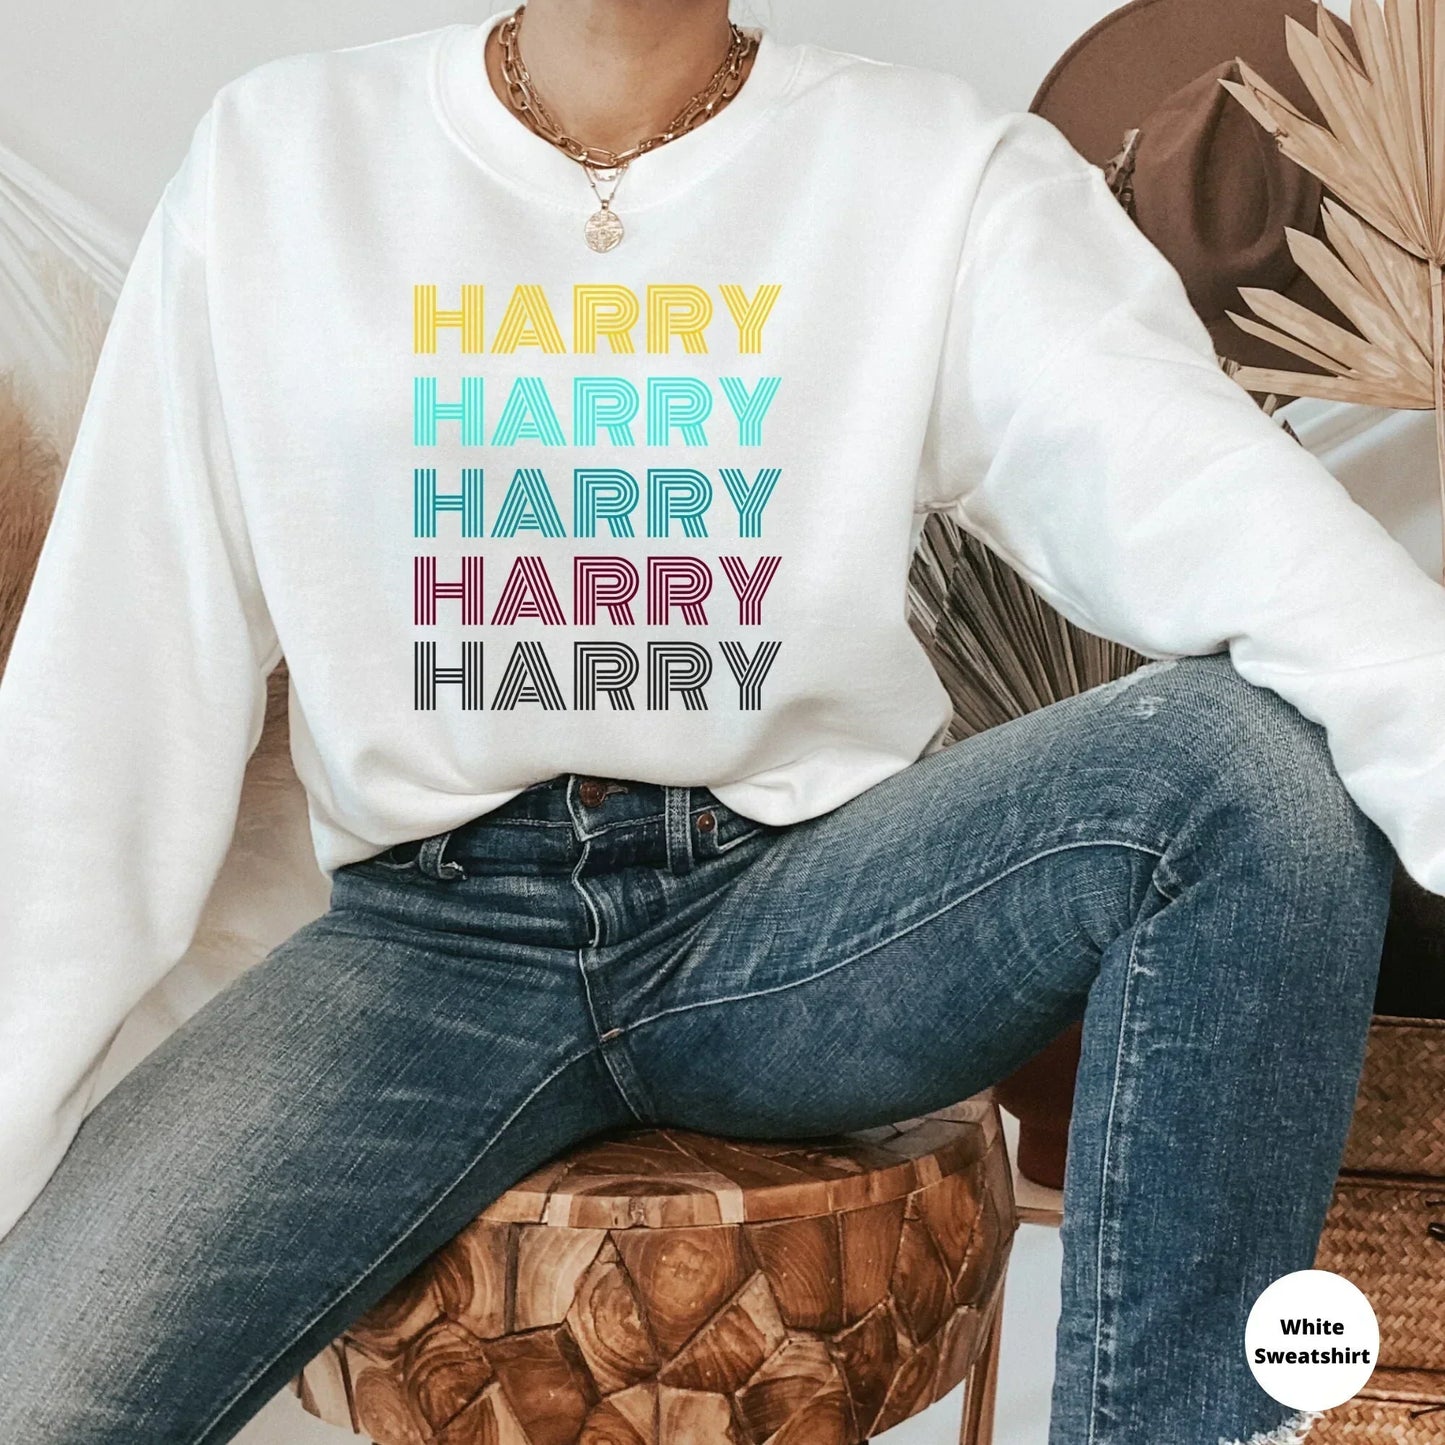 Retro Harry Shirt, Treat People With Kindness, Harry Styles Shirt, Fine Line Shirt, Kindness Sweatshirt for Women, One Direction Hoodie HMDesignStudioUS